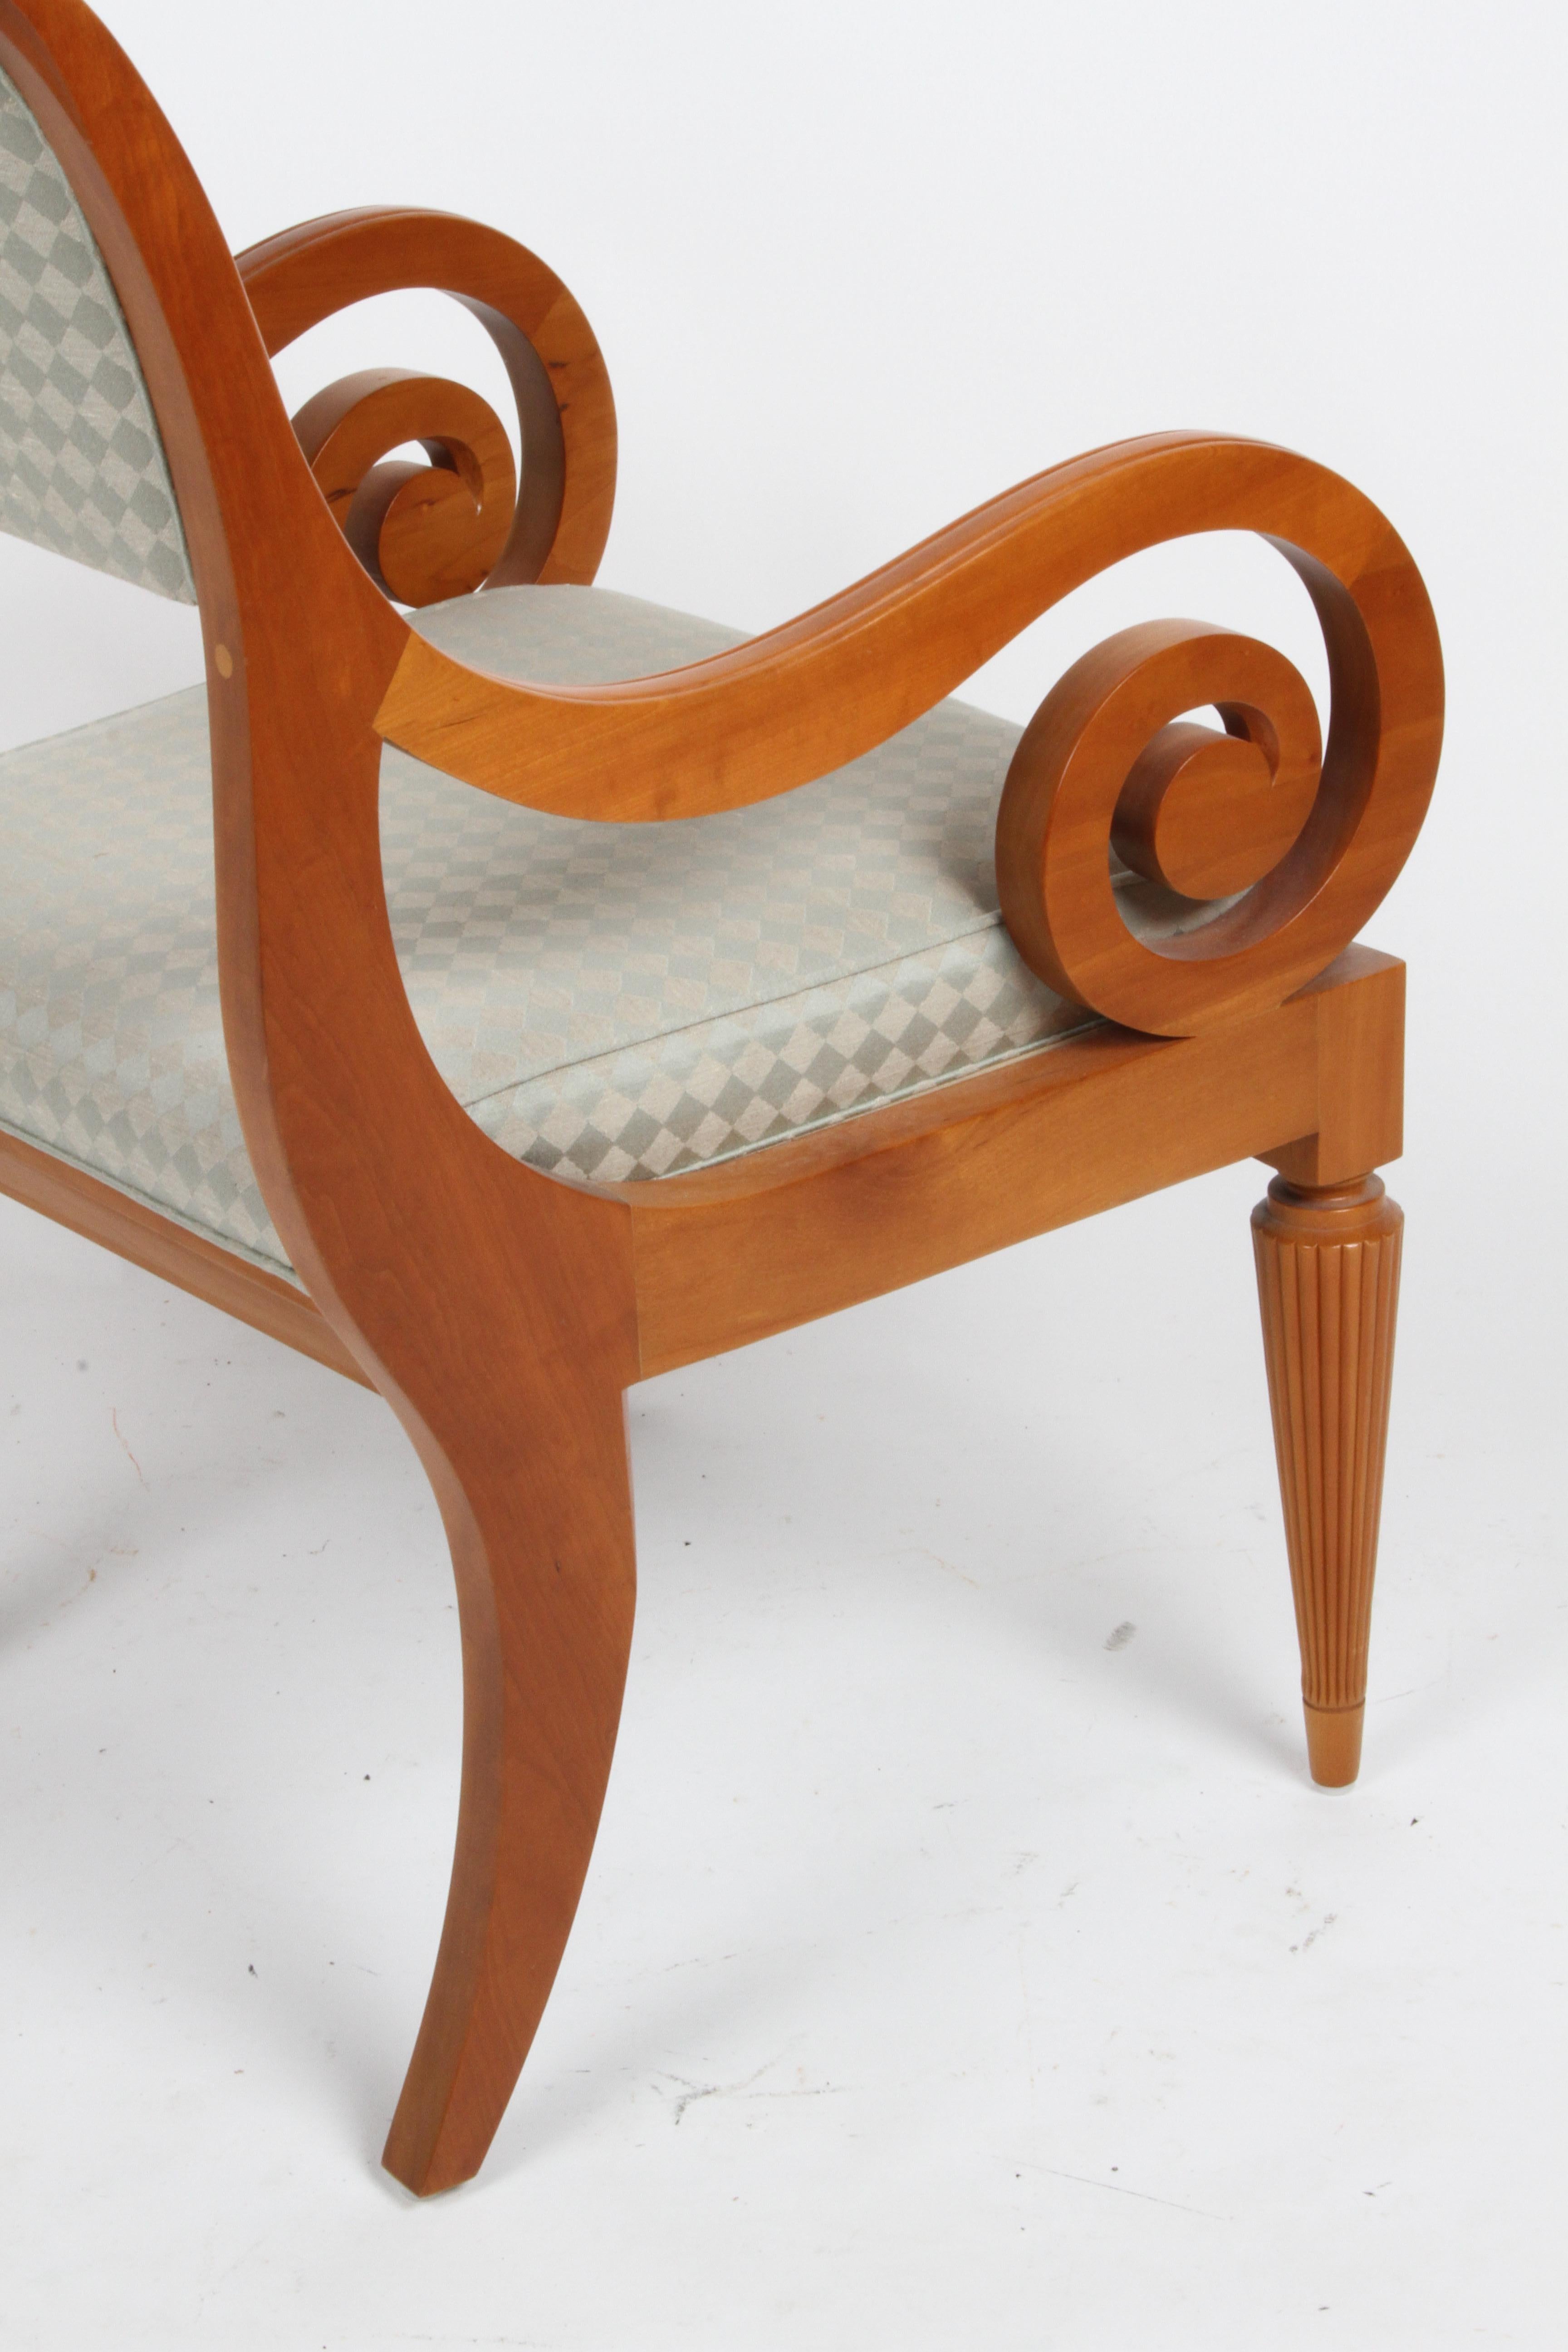 Rare Set of 6 Robert A.M. Stern Bodleian Dining Chairs in Natural Cherry for HBF For Sale 6